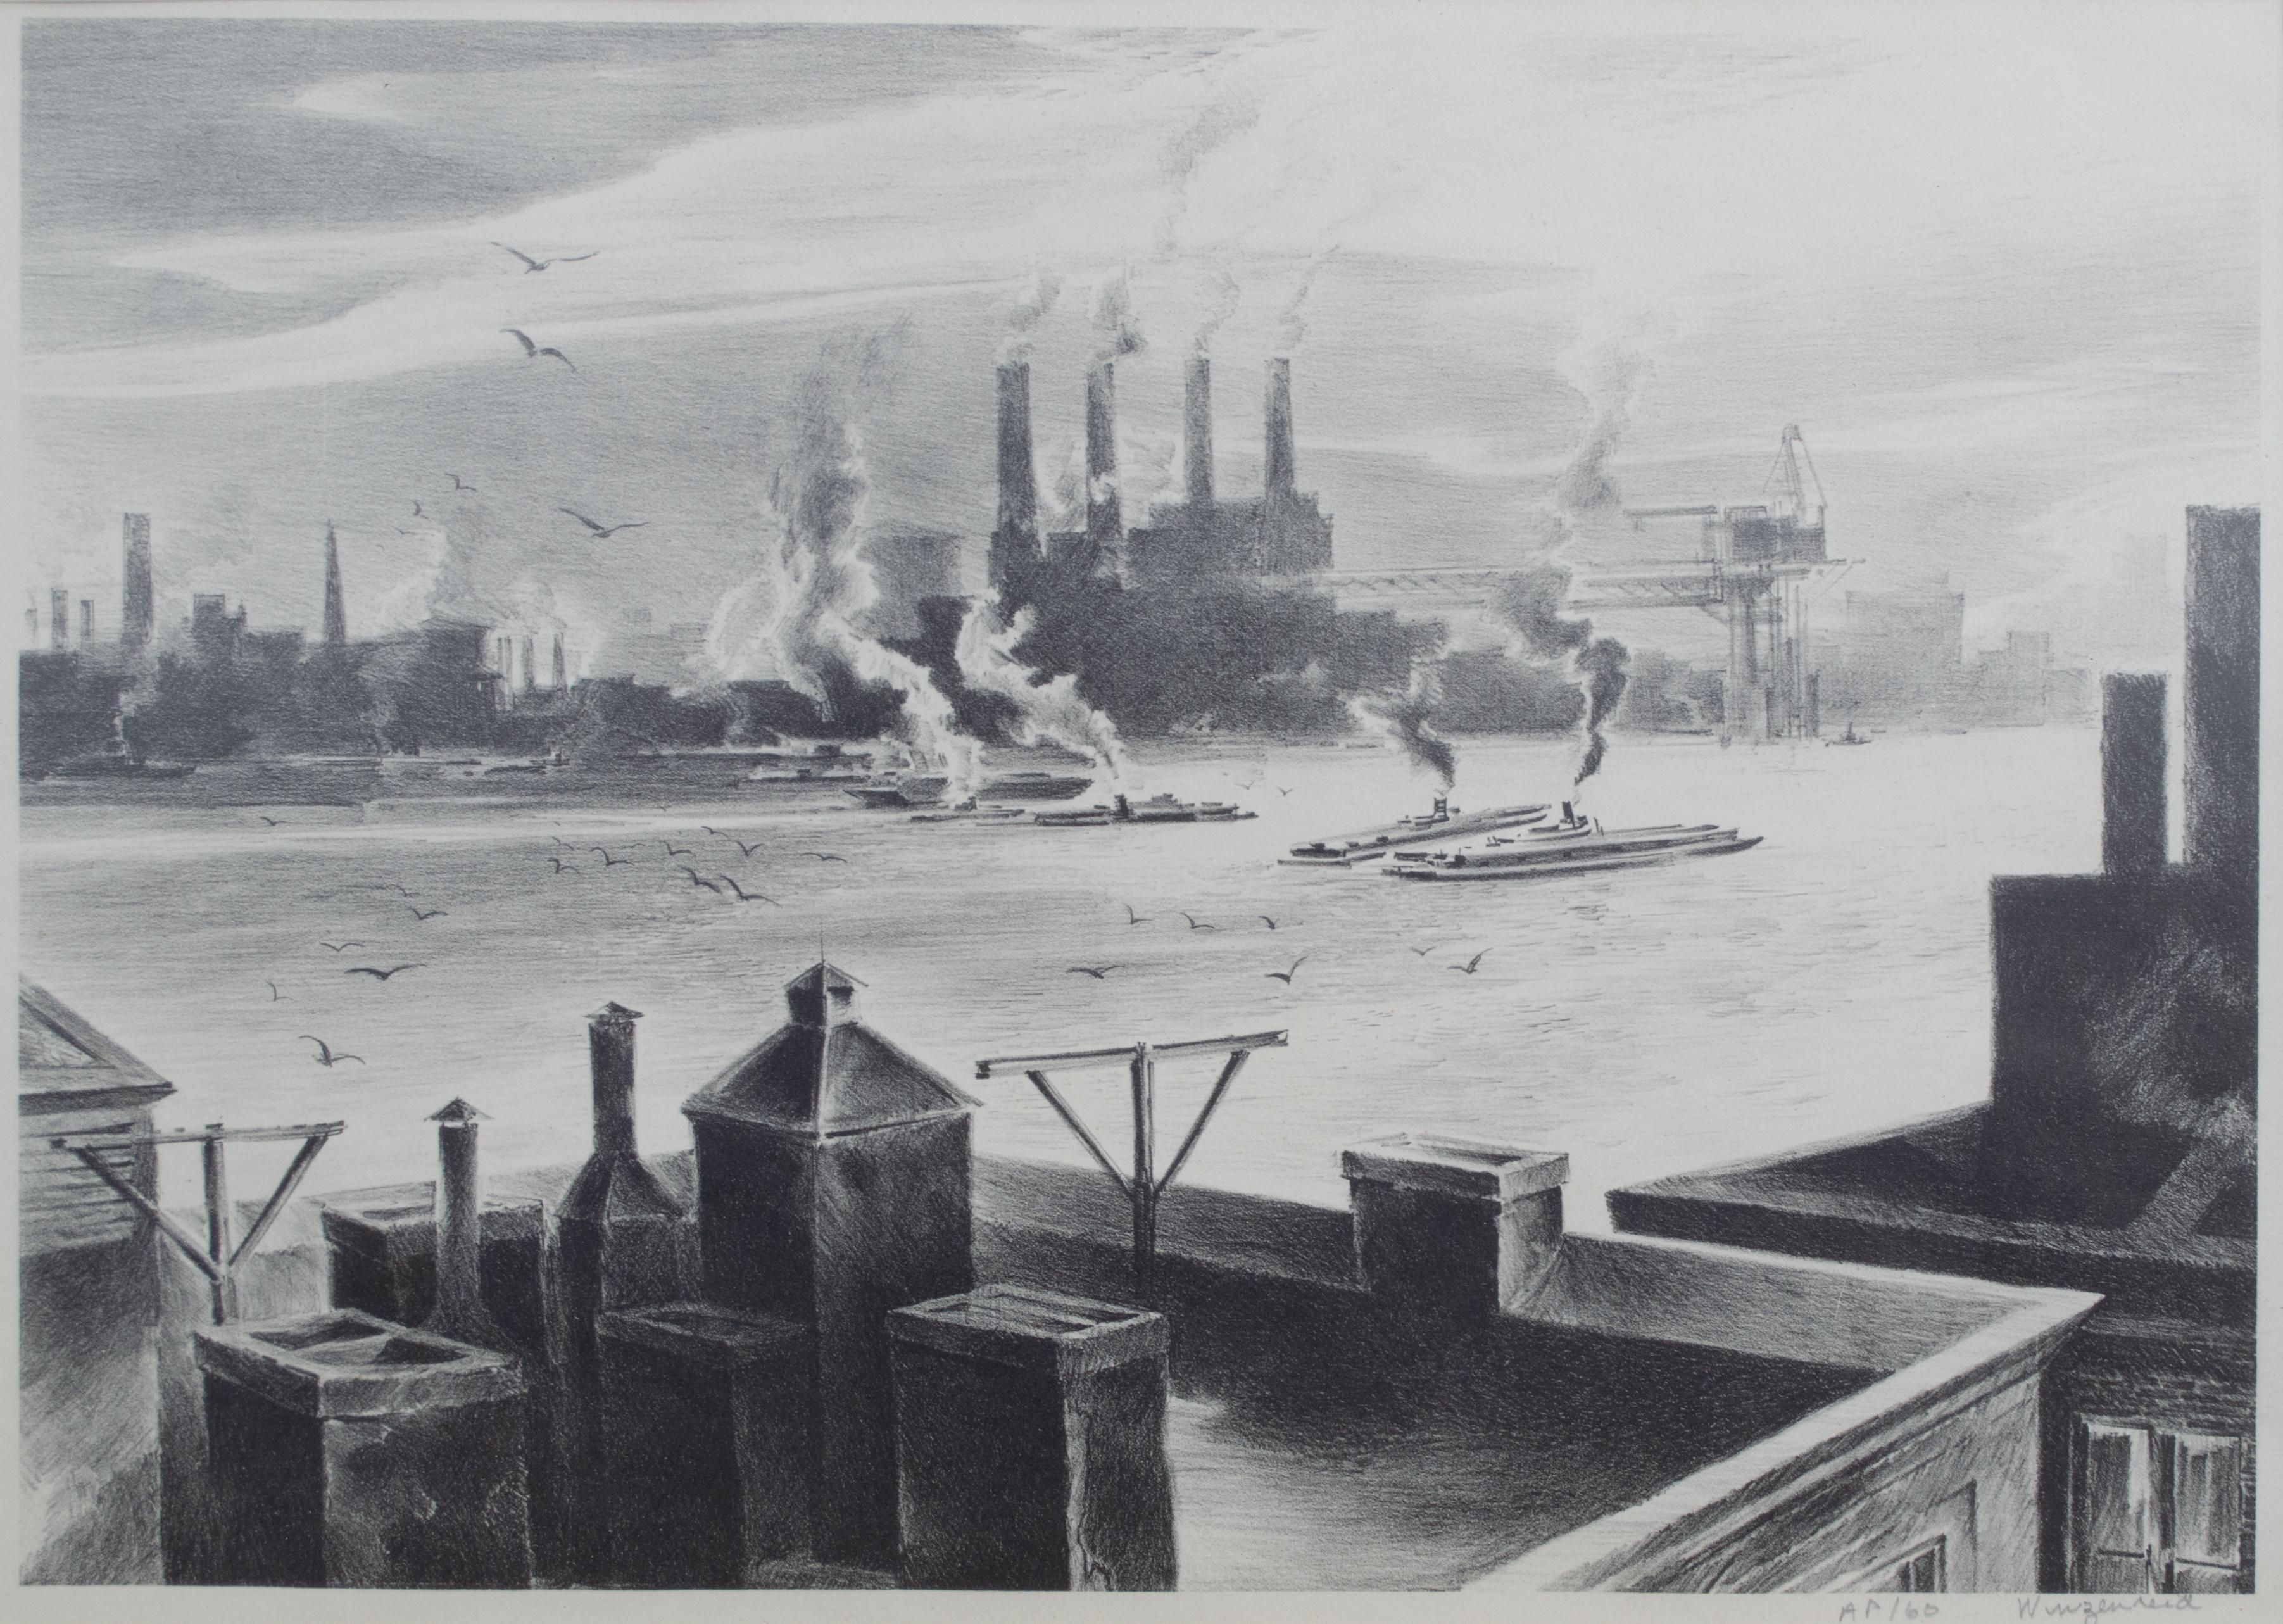 Henry Winzenreid (American, 1892-1981)
Untitled (Steamboats and Factories), 20th century
Lithograph
Sight size: 10 x 14 in. 
Framed: 17 1/8 x 21 1/4 in. 
Signed lower right: AP/60 Winzenreid

Henry E. Winzenreid 'Henry Winzenreid': An American